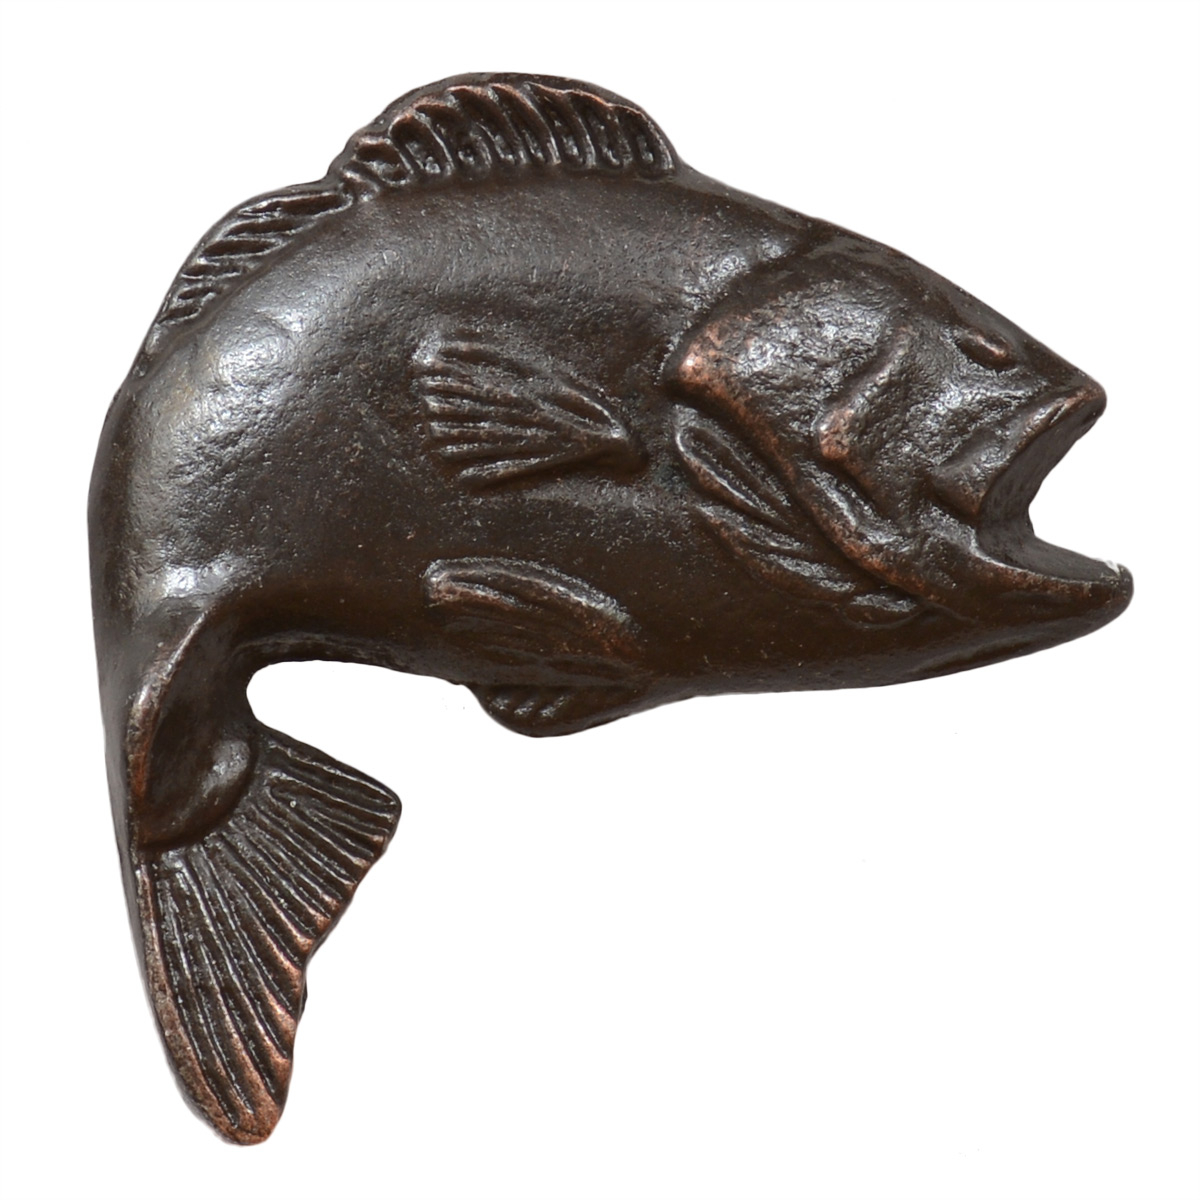 Bass Fish Cabinet Knob pertaining to dimensions 1200 X 1200